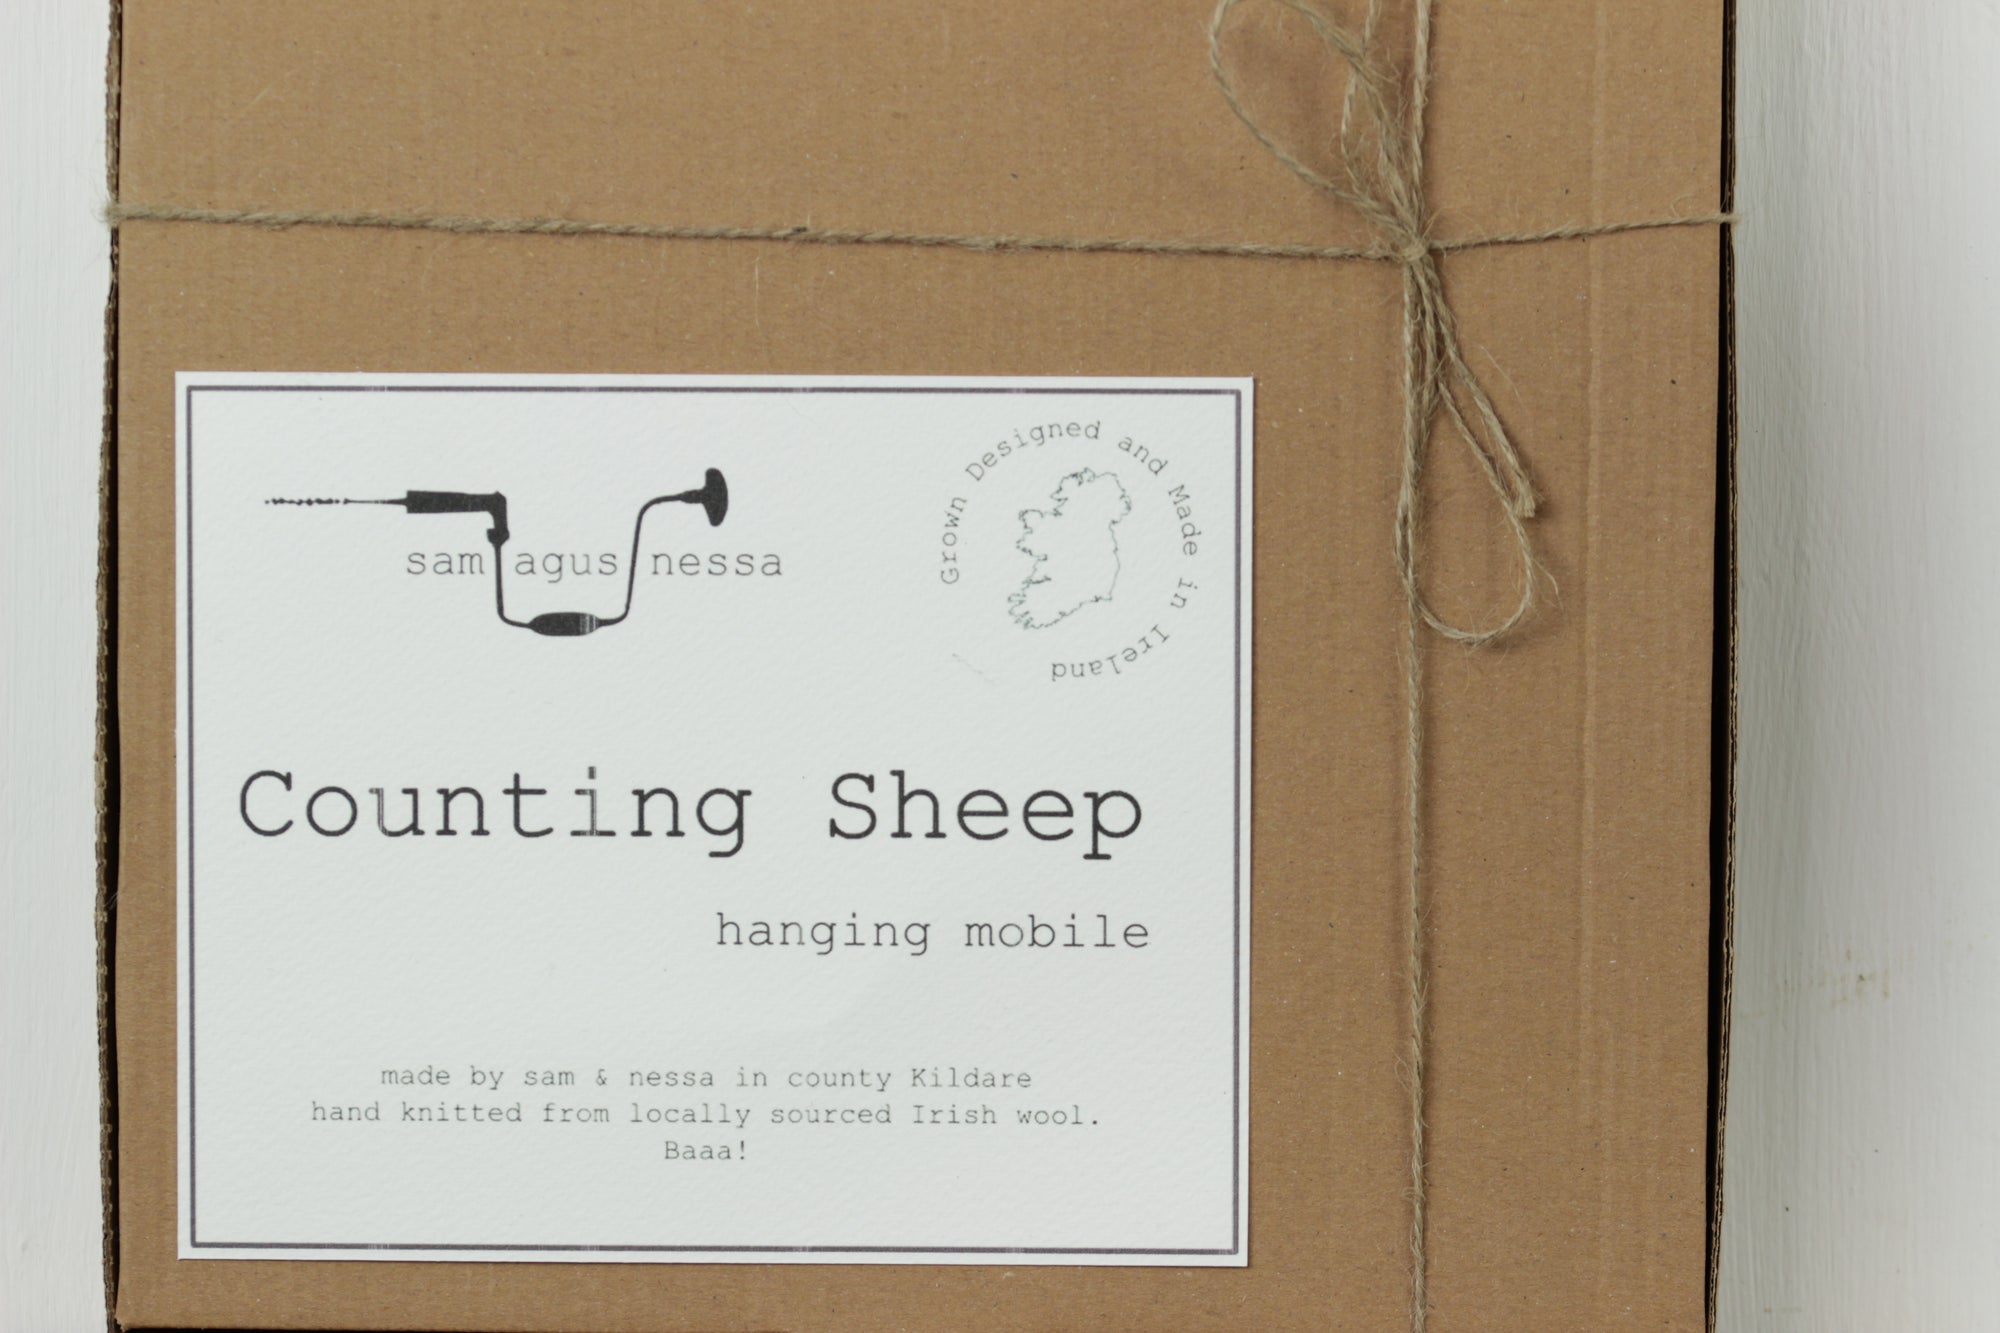 Hanging Mobile, Counting Sheep, Sam Agus Nessa